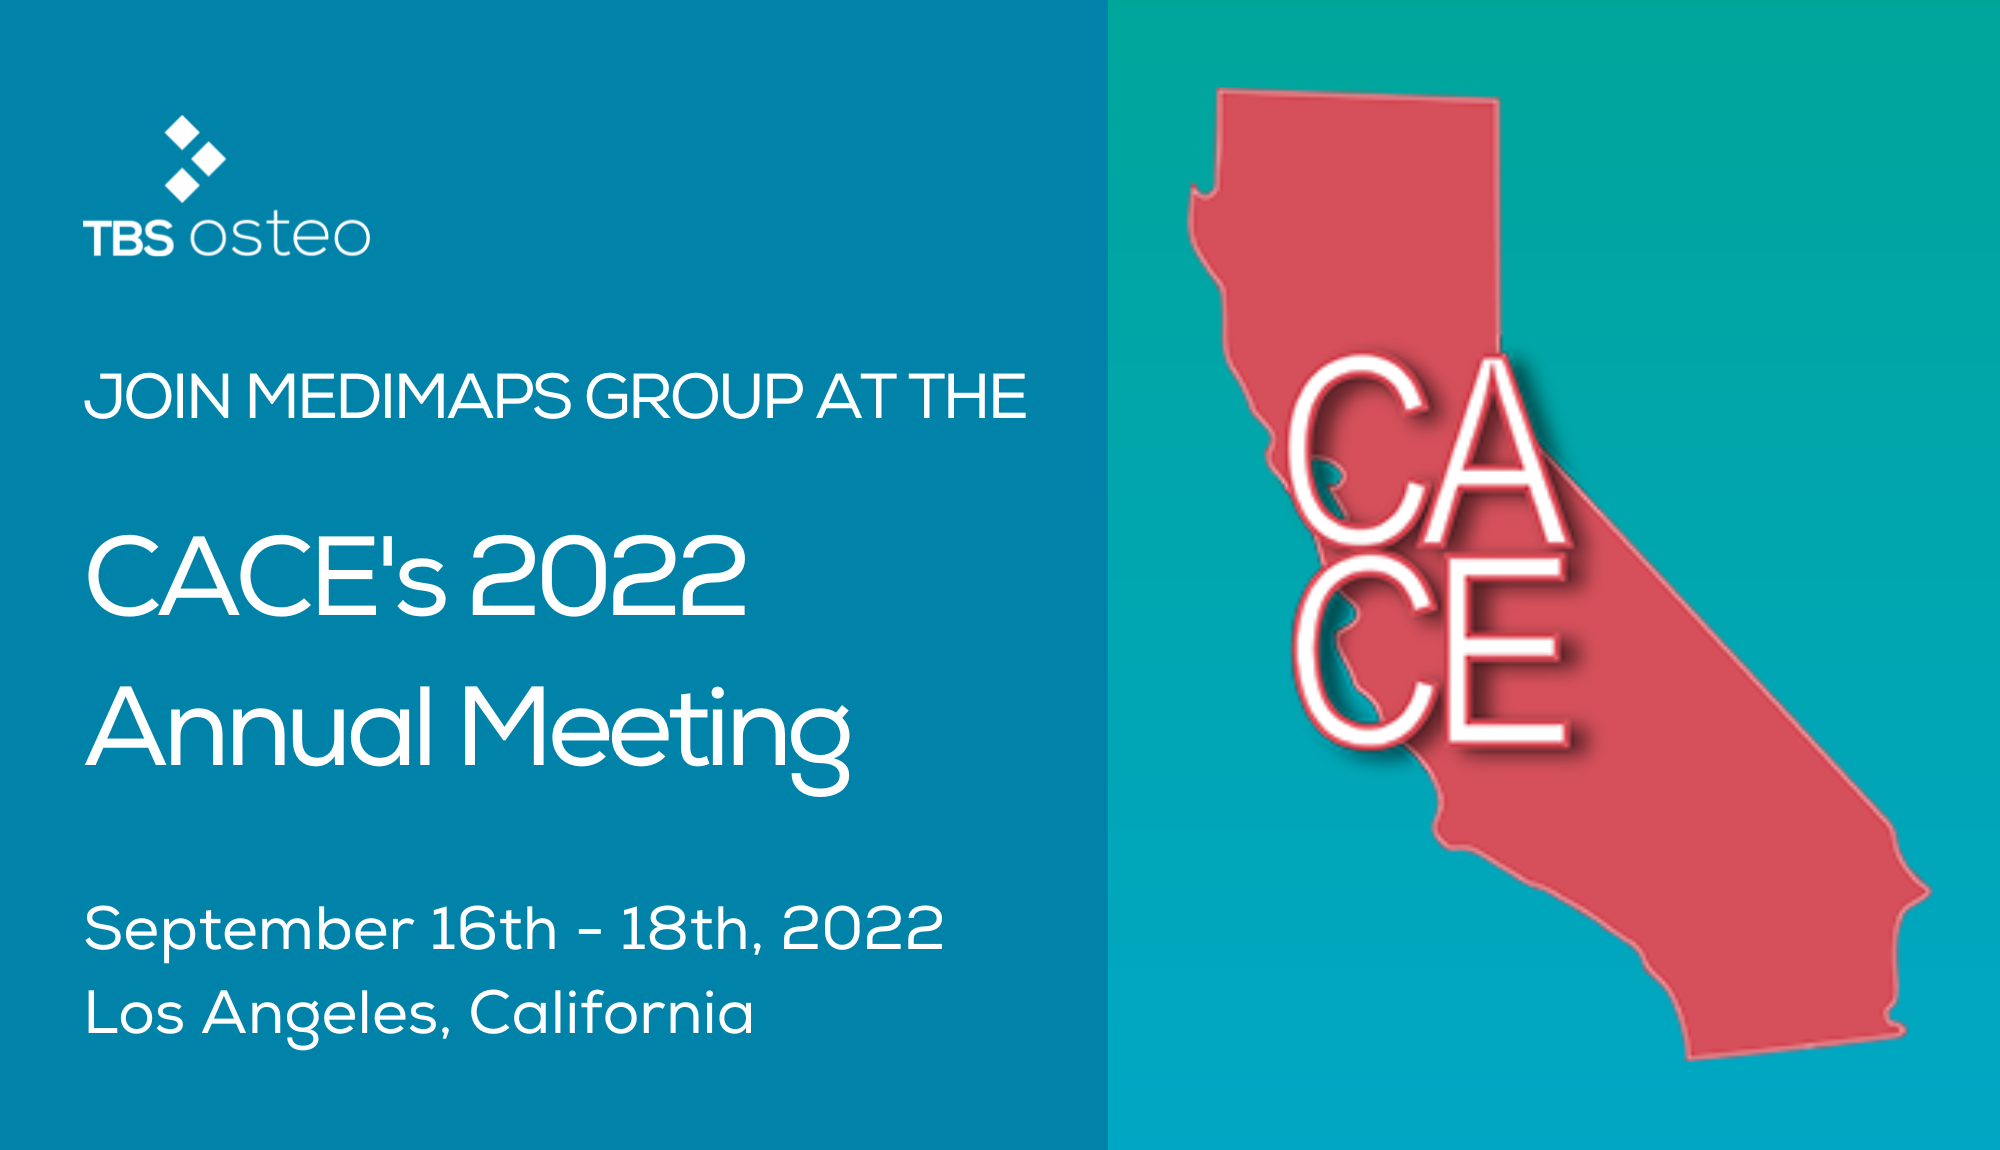 Join Medimaps Group at the CACE's 2022 Annual Meeting